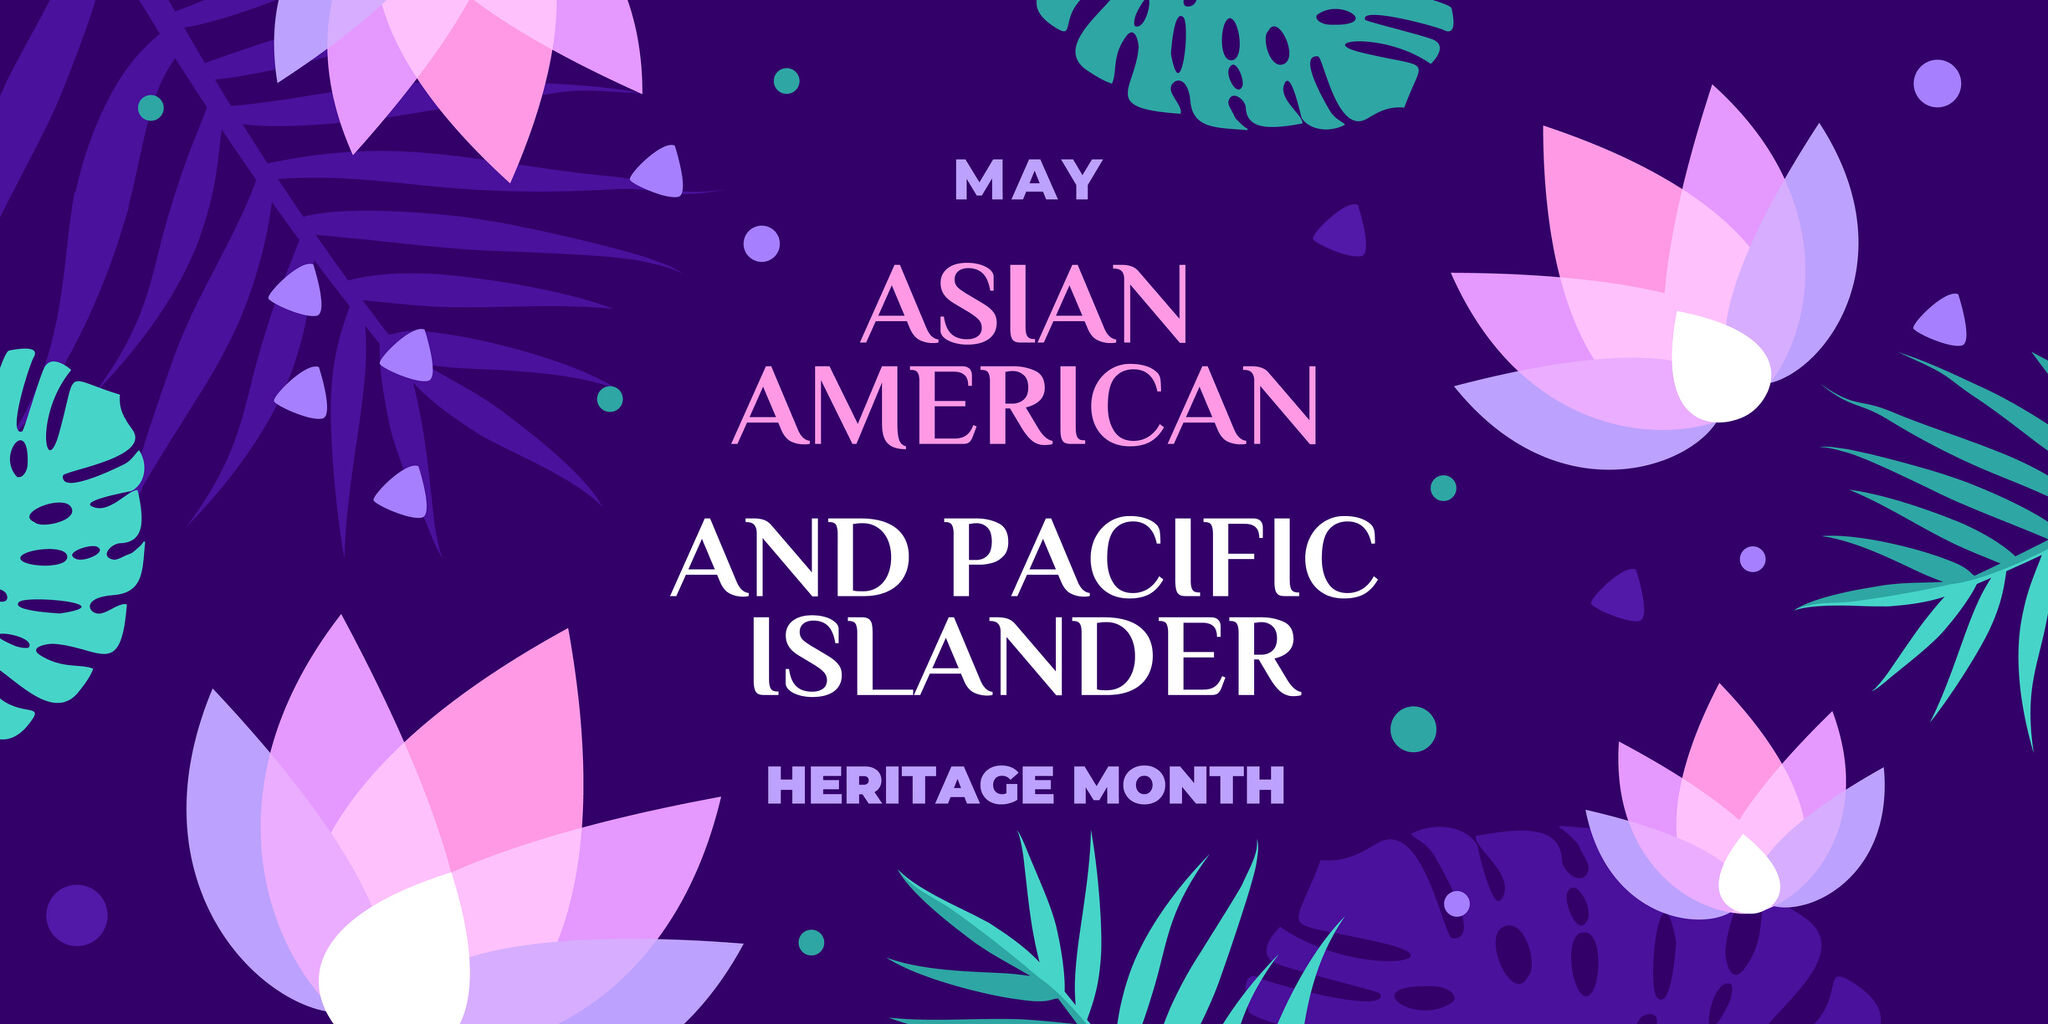 How to celebrate Asian Pacific American Heritage Month in May